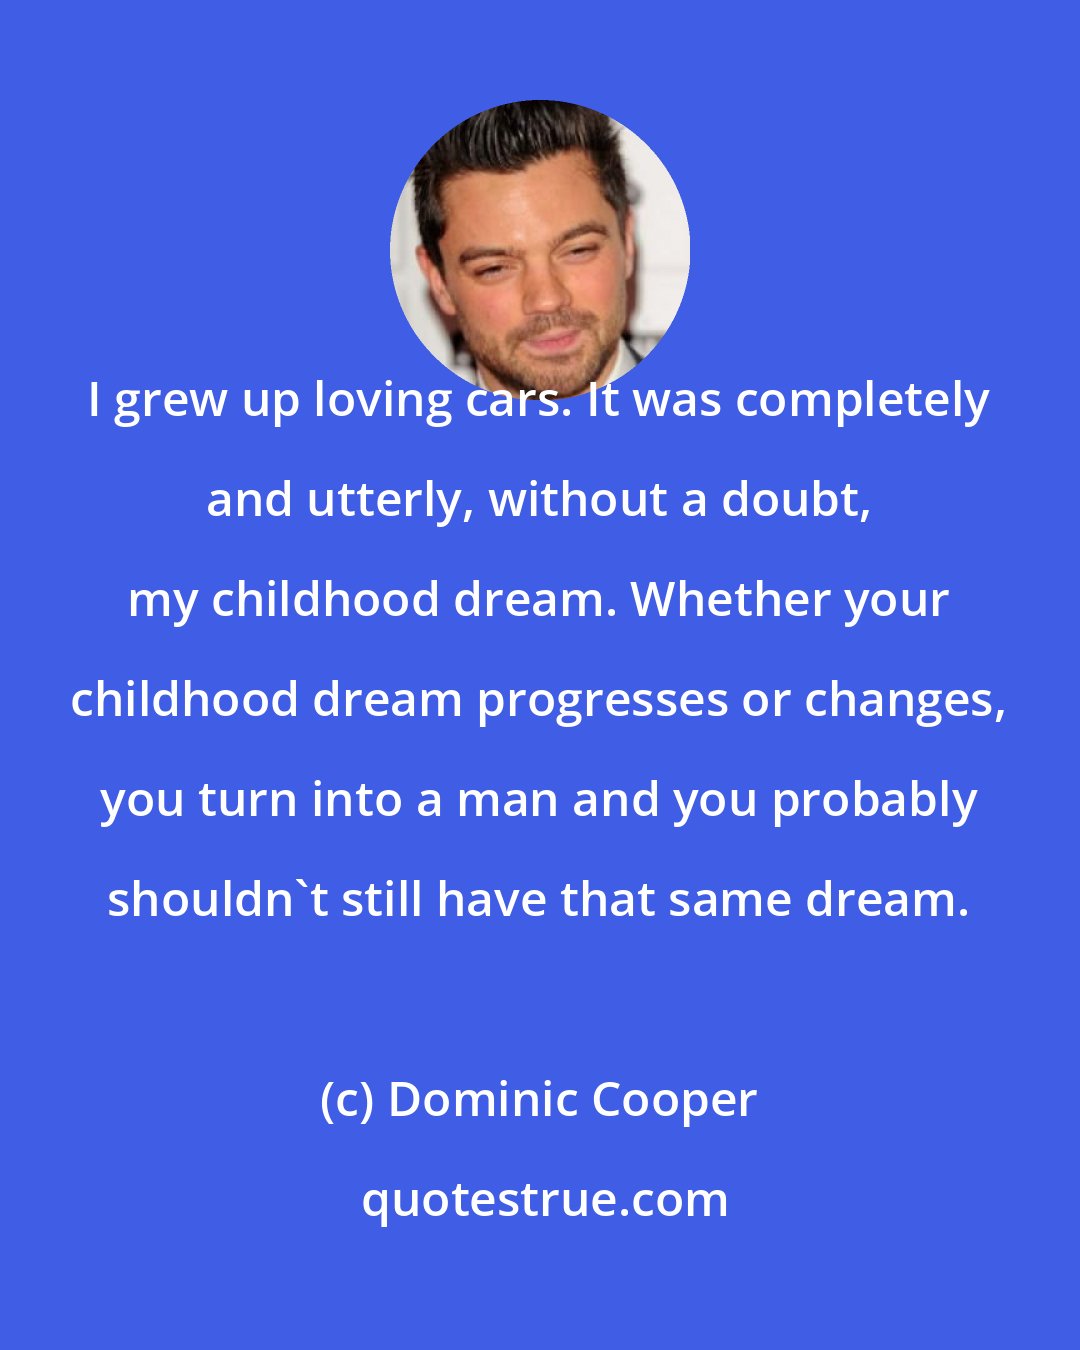 Dominic Cooper: I grew up loving cars. It was completely and utterly, without a doubt, my childhood dream. Whether your childhood dream progresses or changes, you turn into a man and you probably shouldn't still have that same dream.